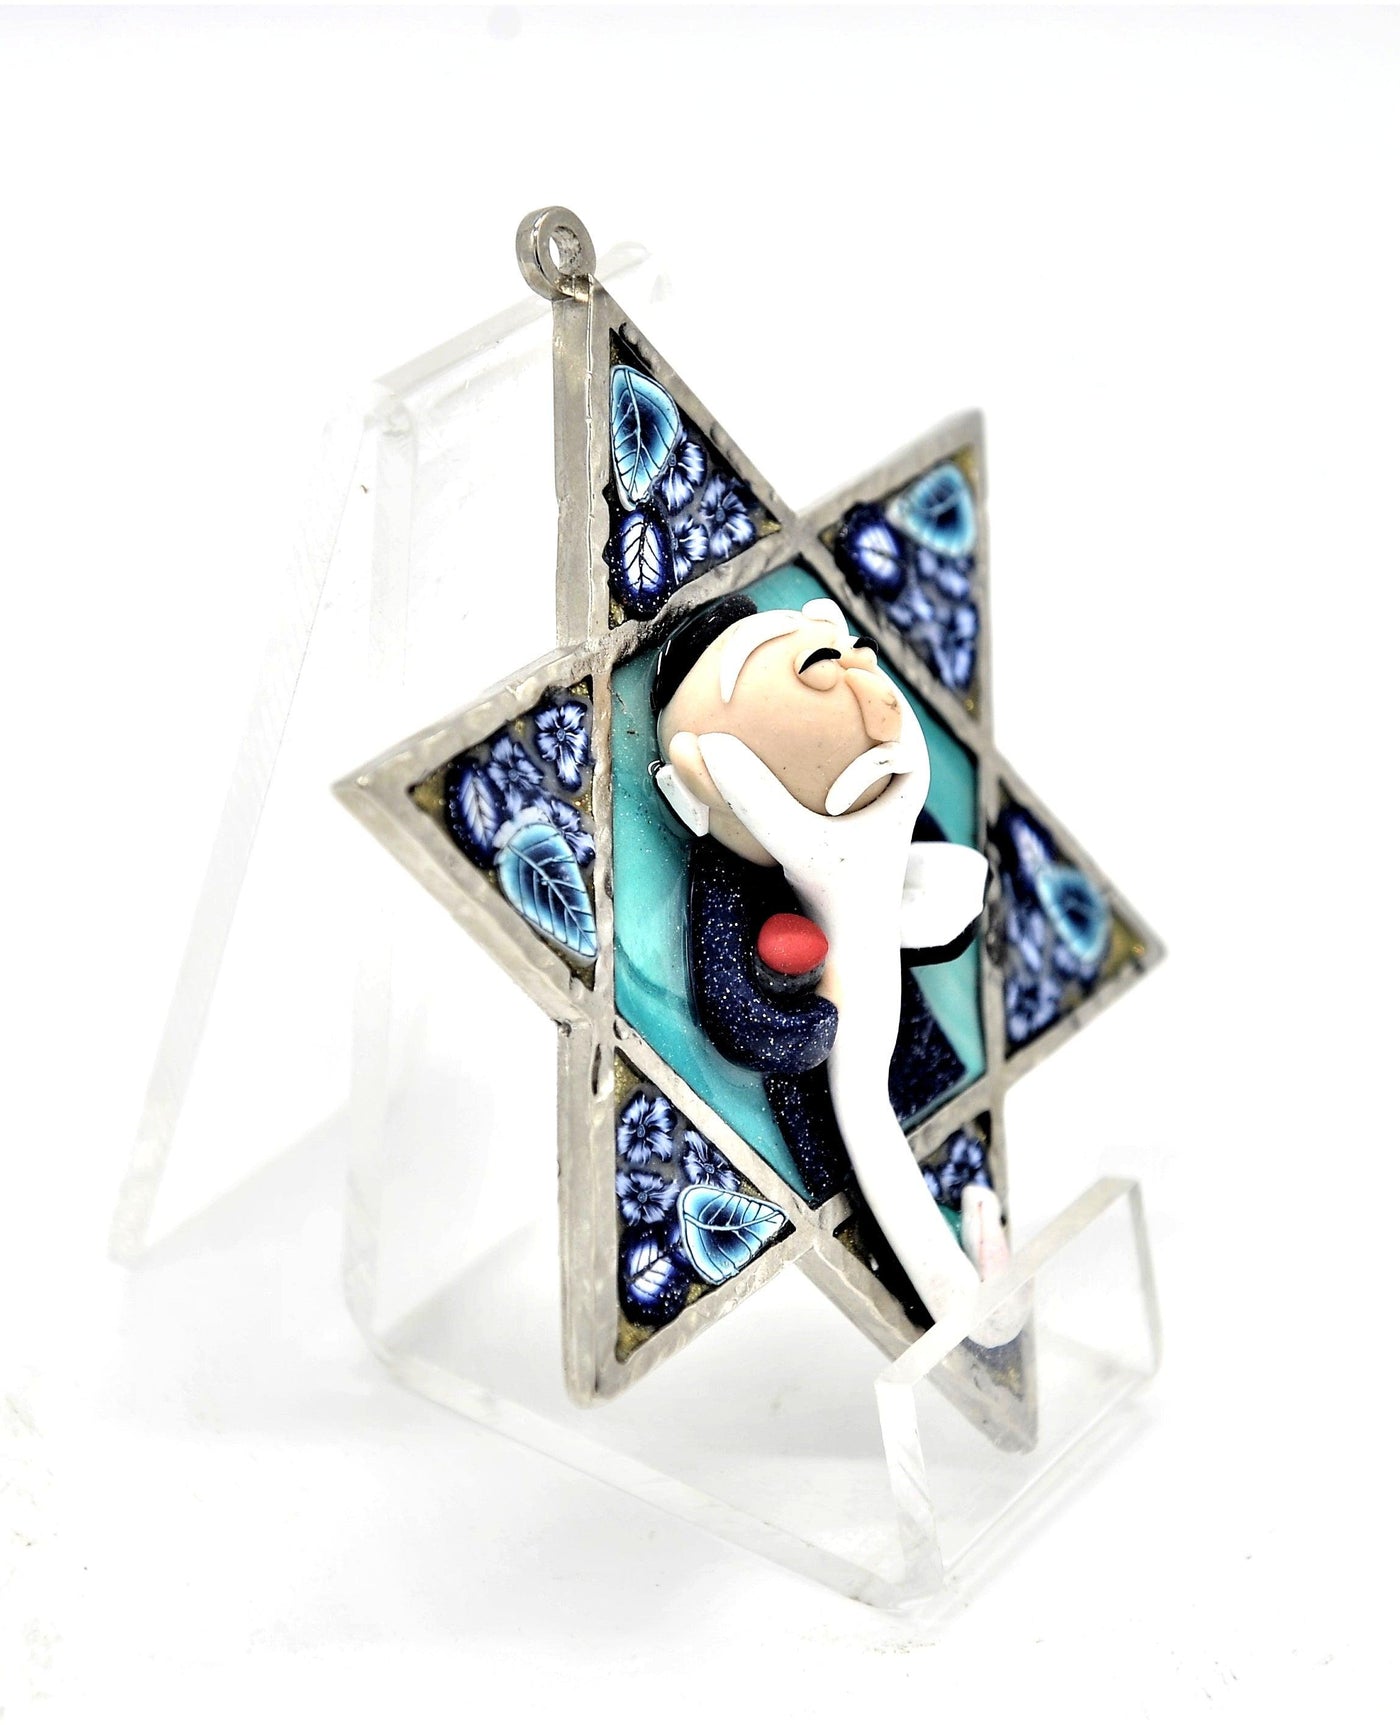 Star of David Fimo Blessings figure for Home Blessing Wall Hanging large #6 - Spring Nahal